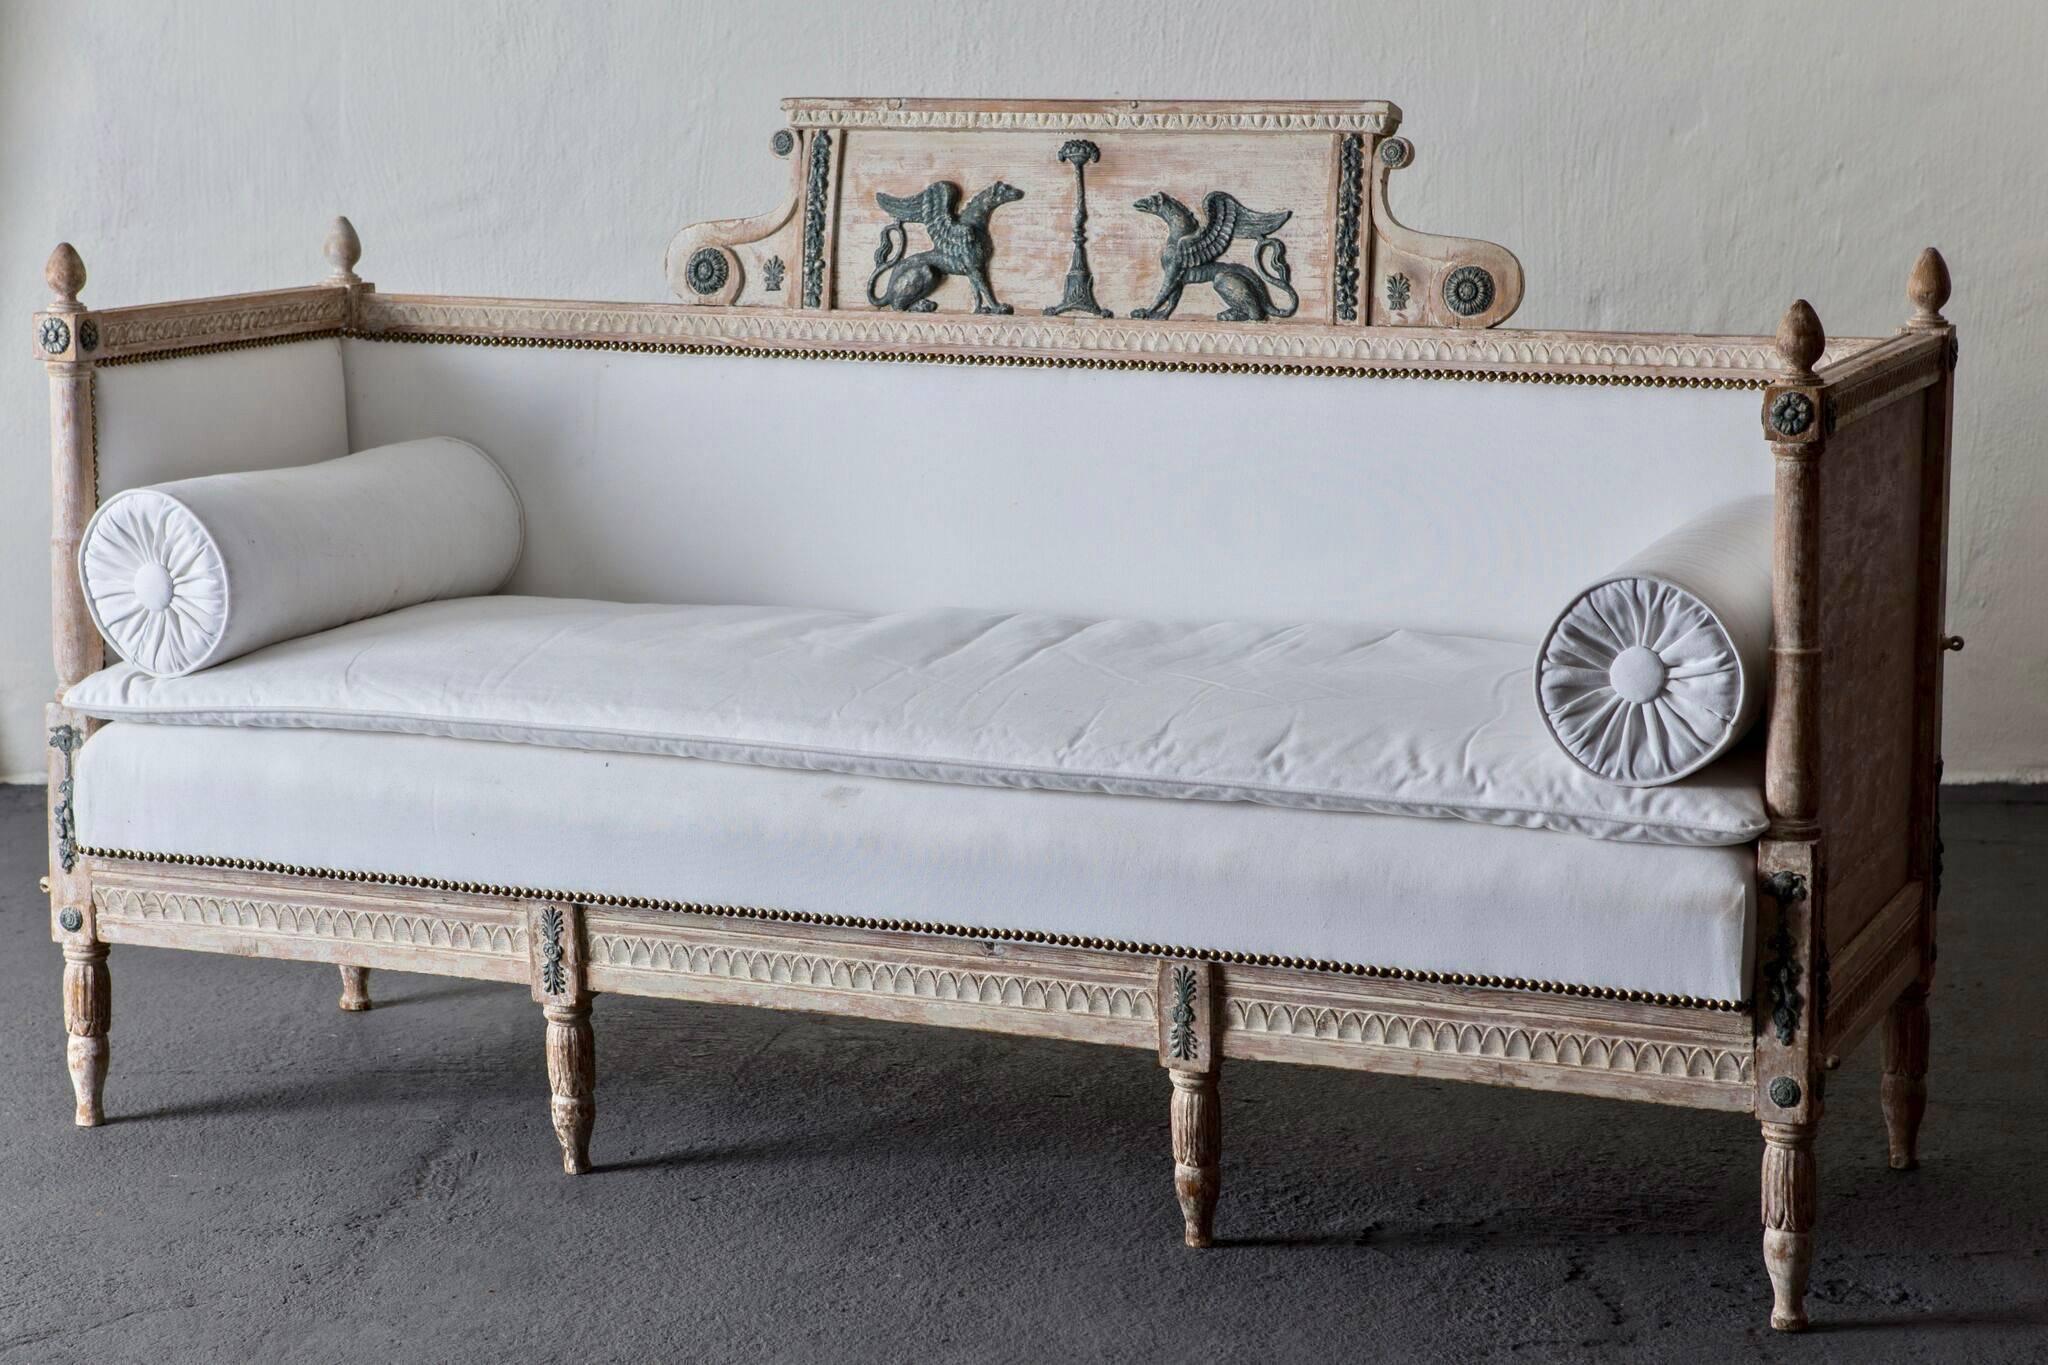 Sofa bench Swedish neoclassical 19th century, Sweden. Sofa made in Sweden during the period 1790-1810. Frame in birch in original white washed paint with green details such as sphinxes and laurel drops. Upholstered in a soft white cotton fabric with